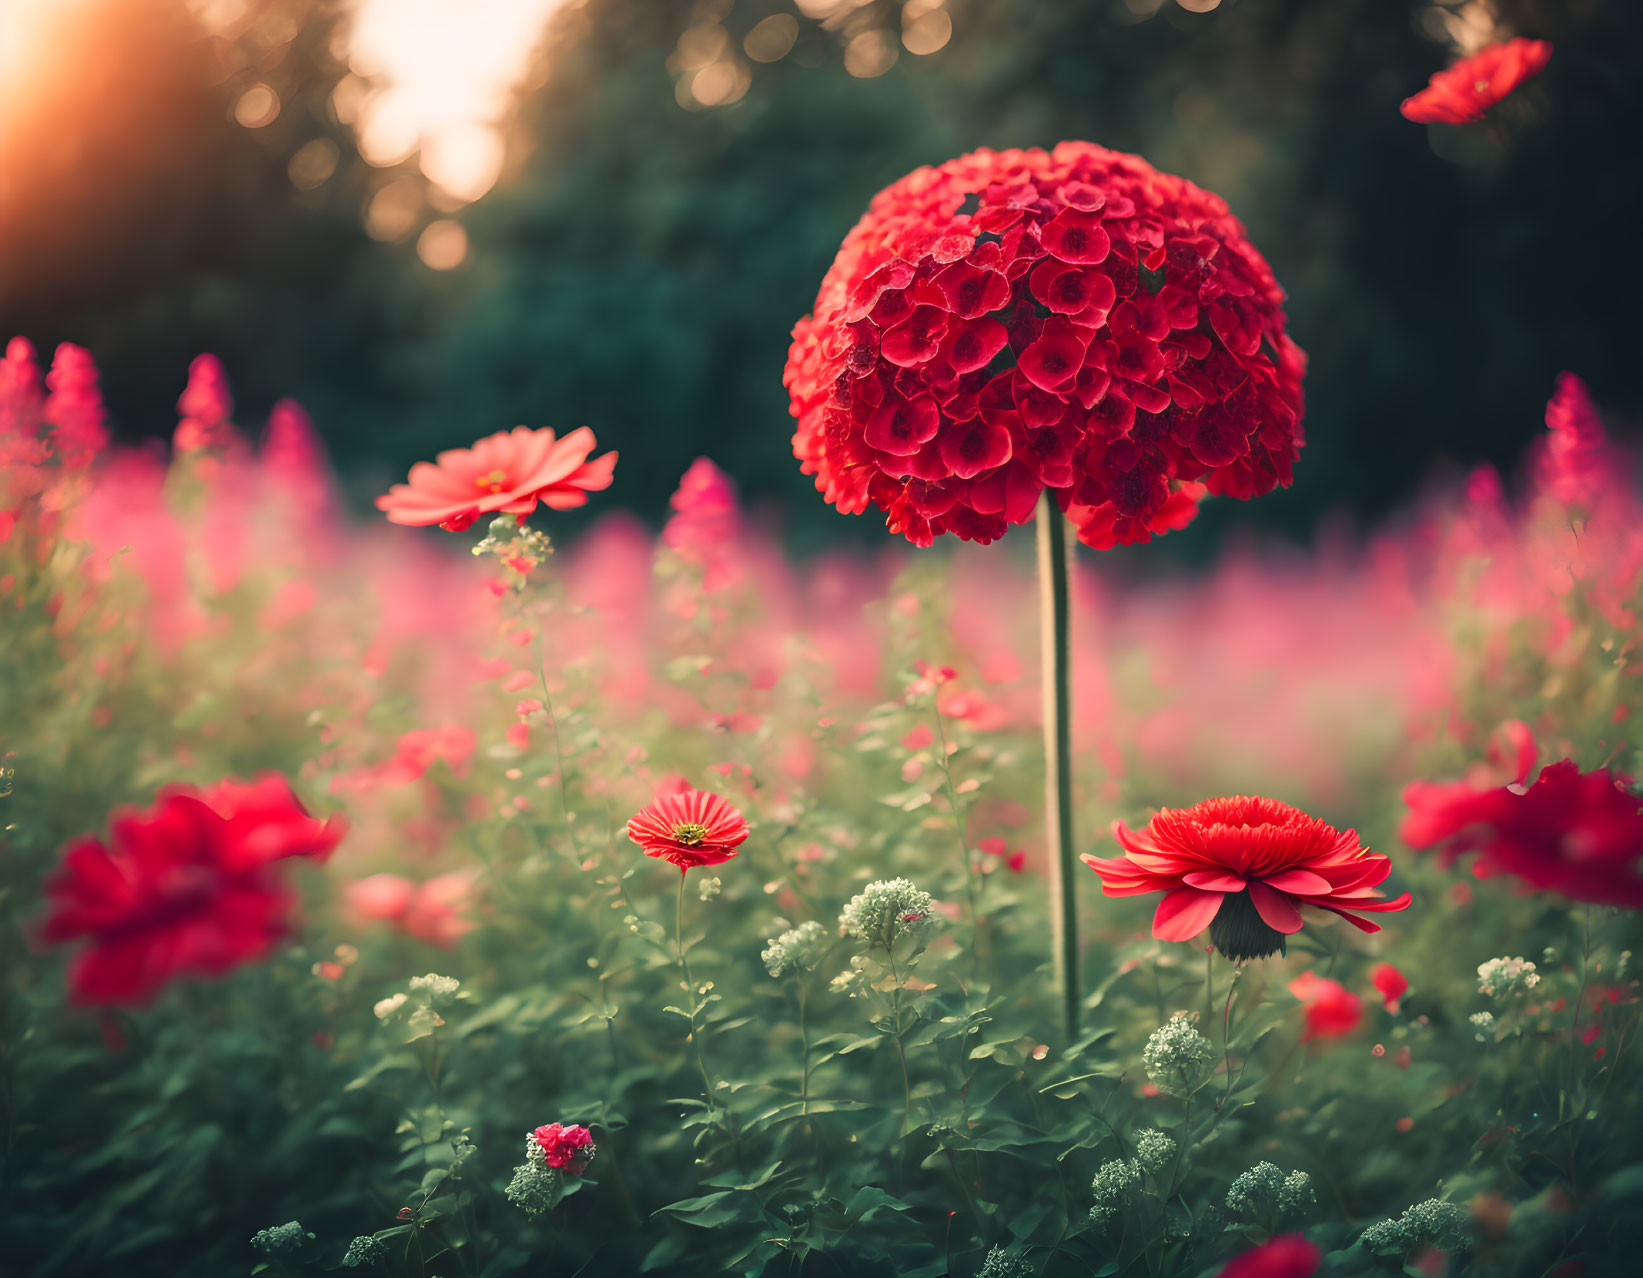 Bright red spherical flower in field of assorted blossoms under golden light